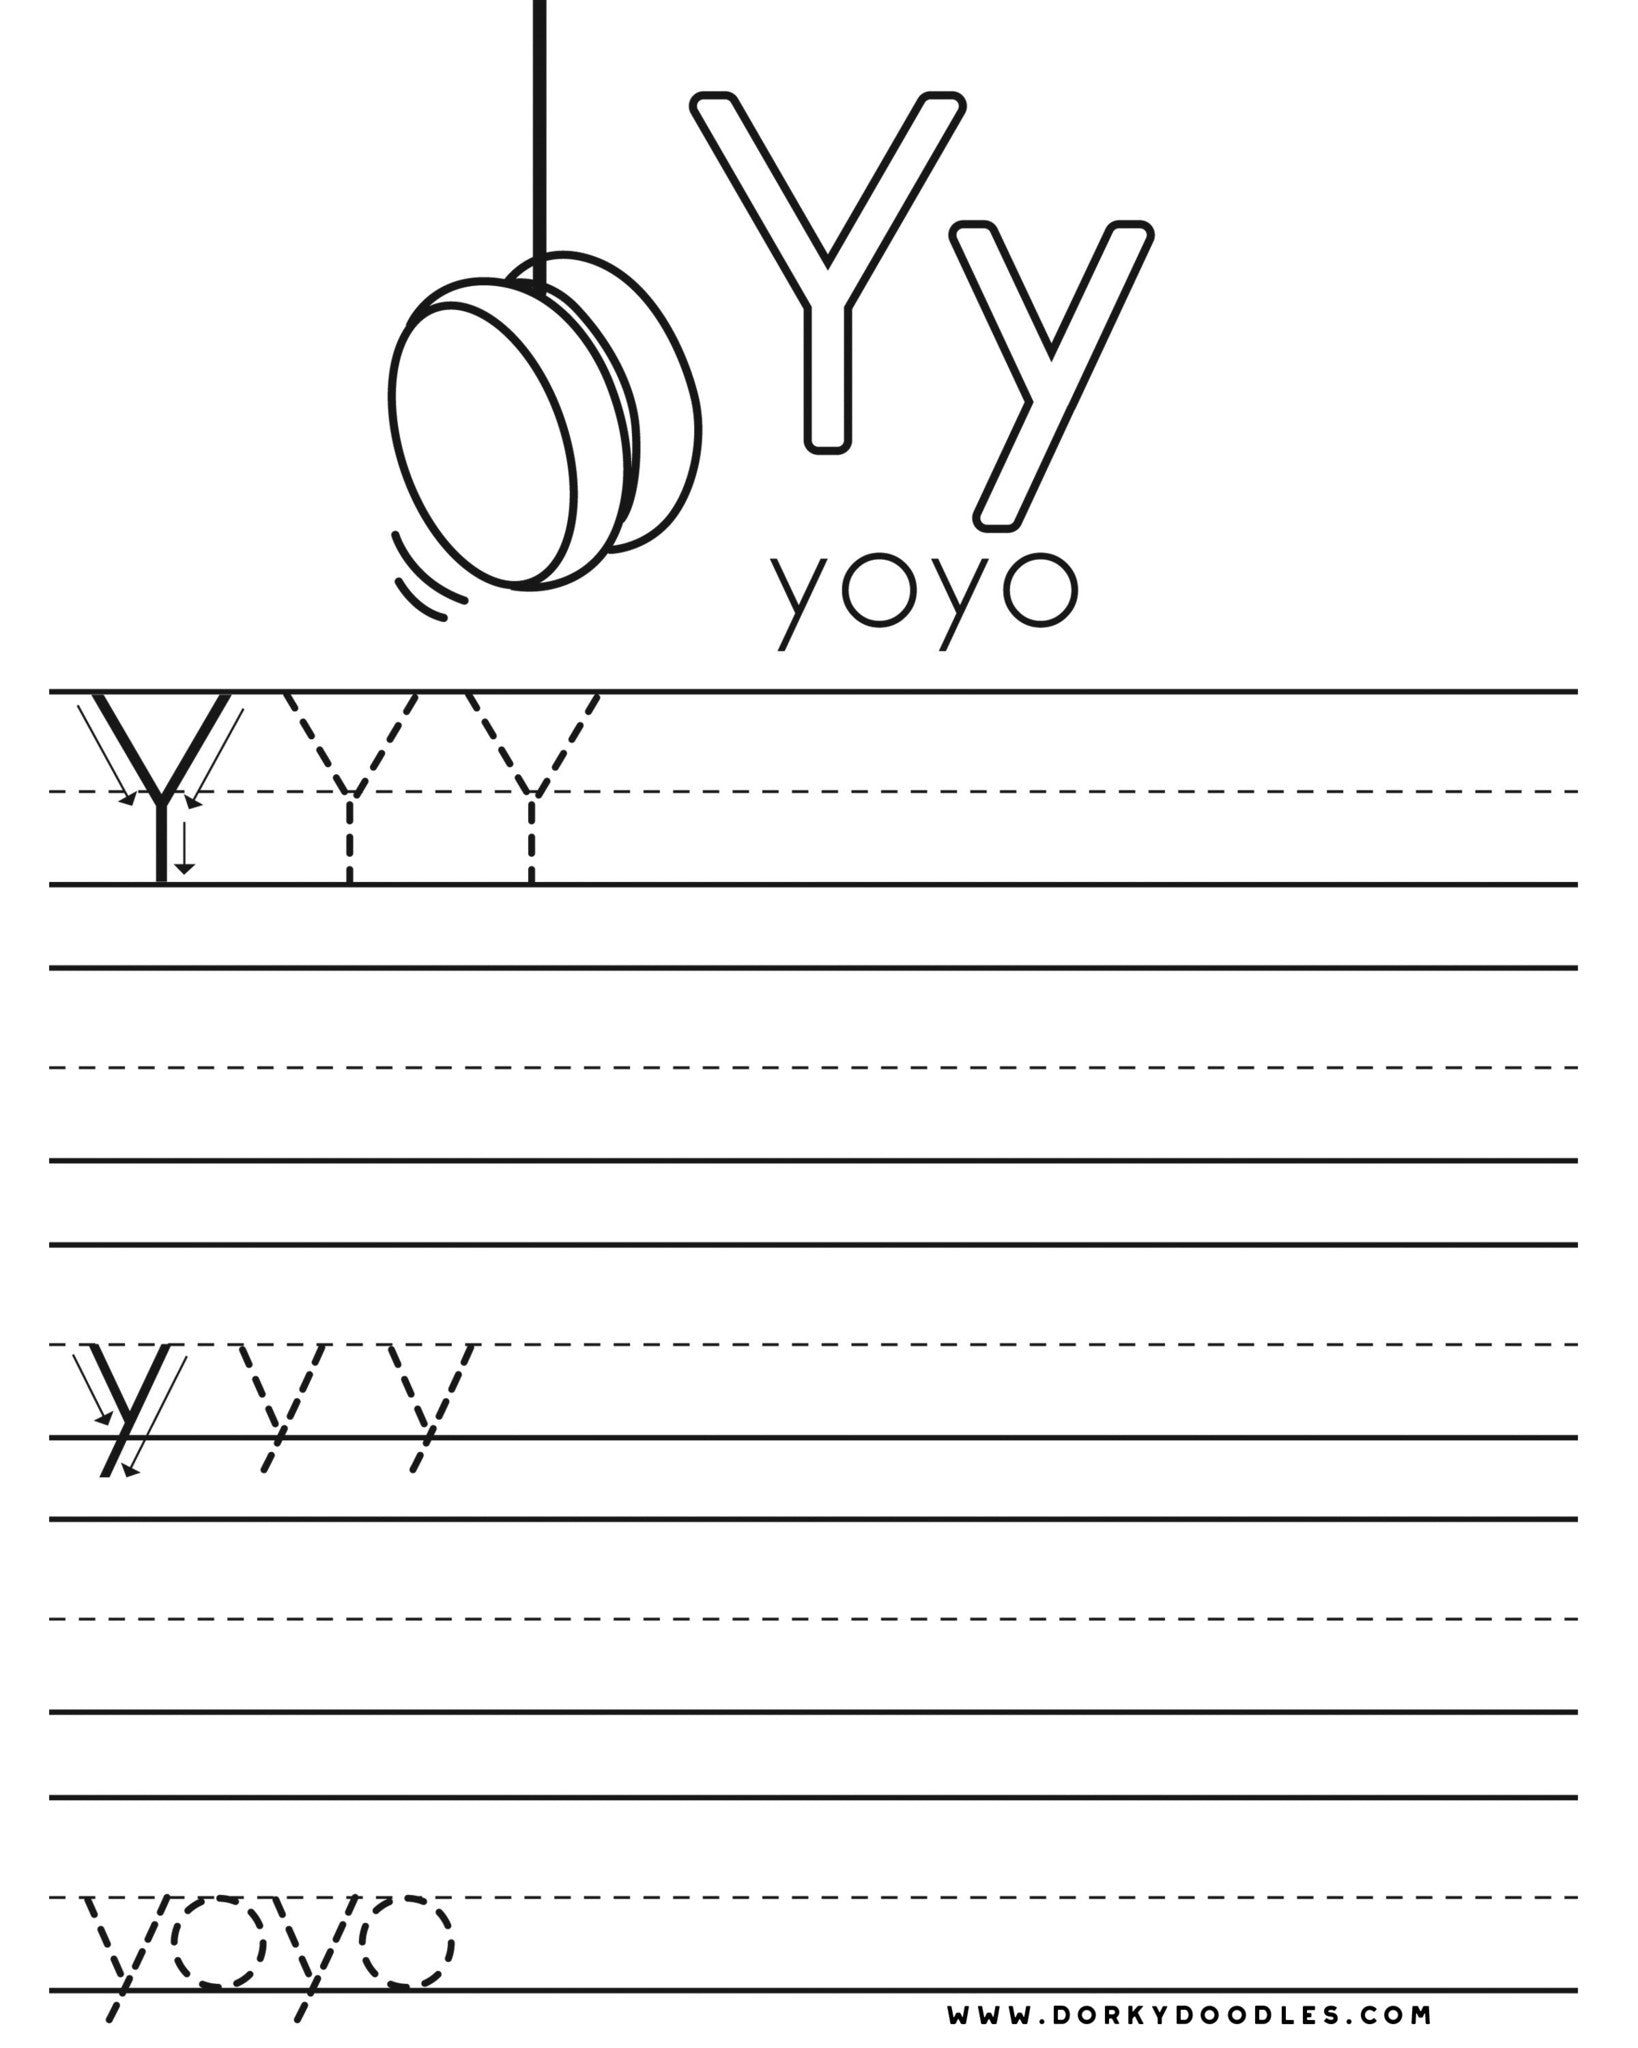 writing-letter-y-worksheets-free-download-gambr-co